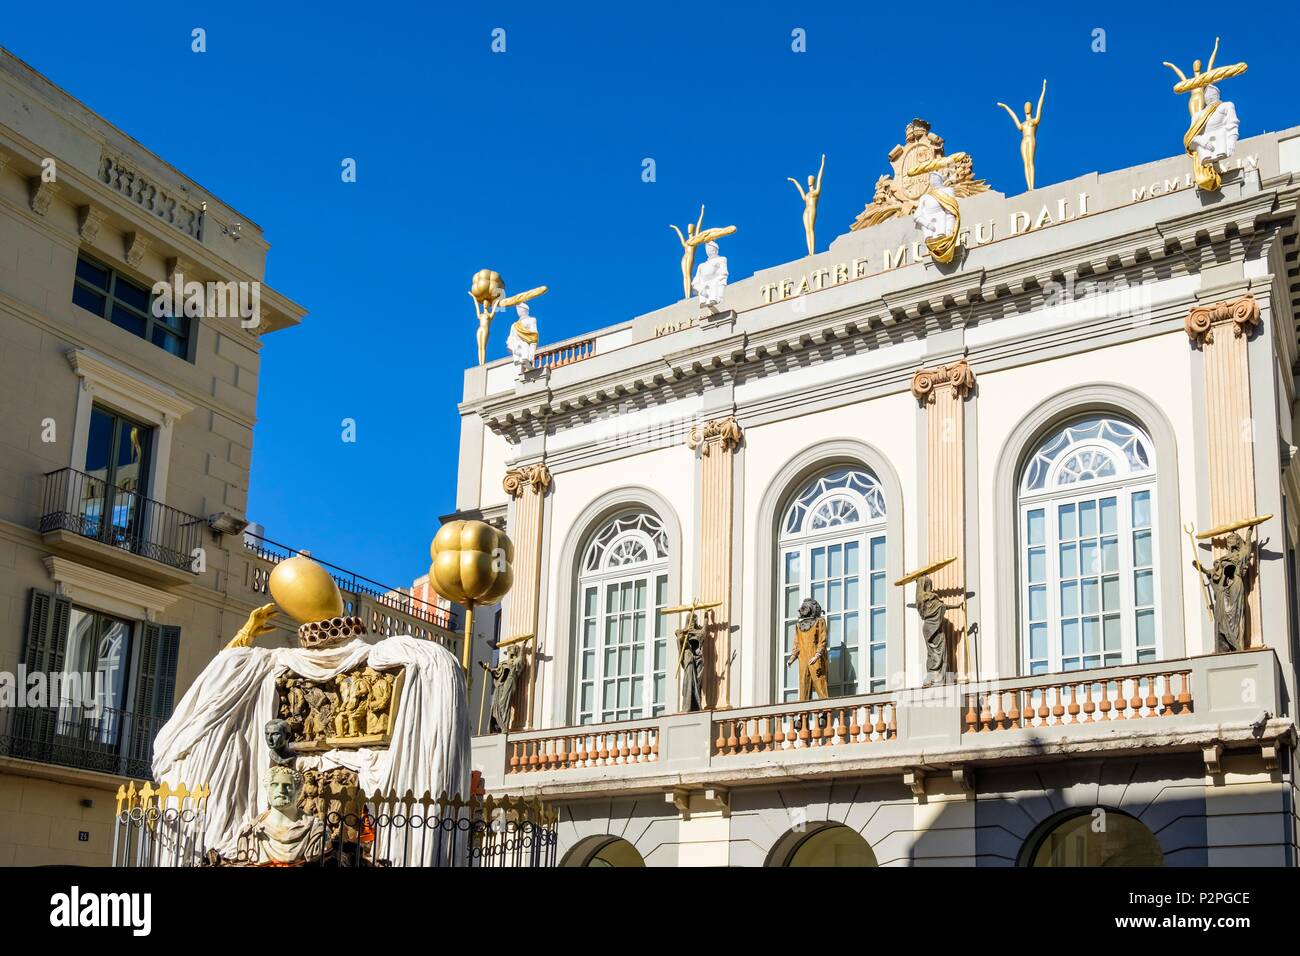 Spain, Catalonia, Figueras, Dali Theatre and Museum dedicated to the artist Salvador Dali in his home town of Figueras Stock Photo